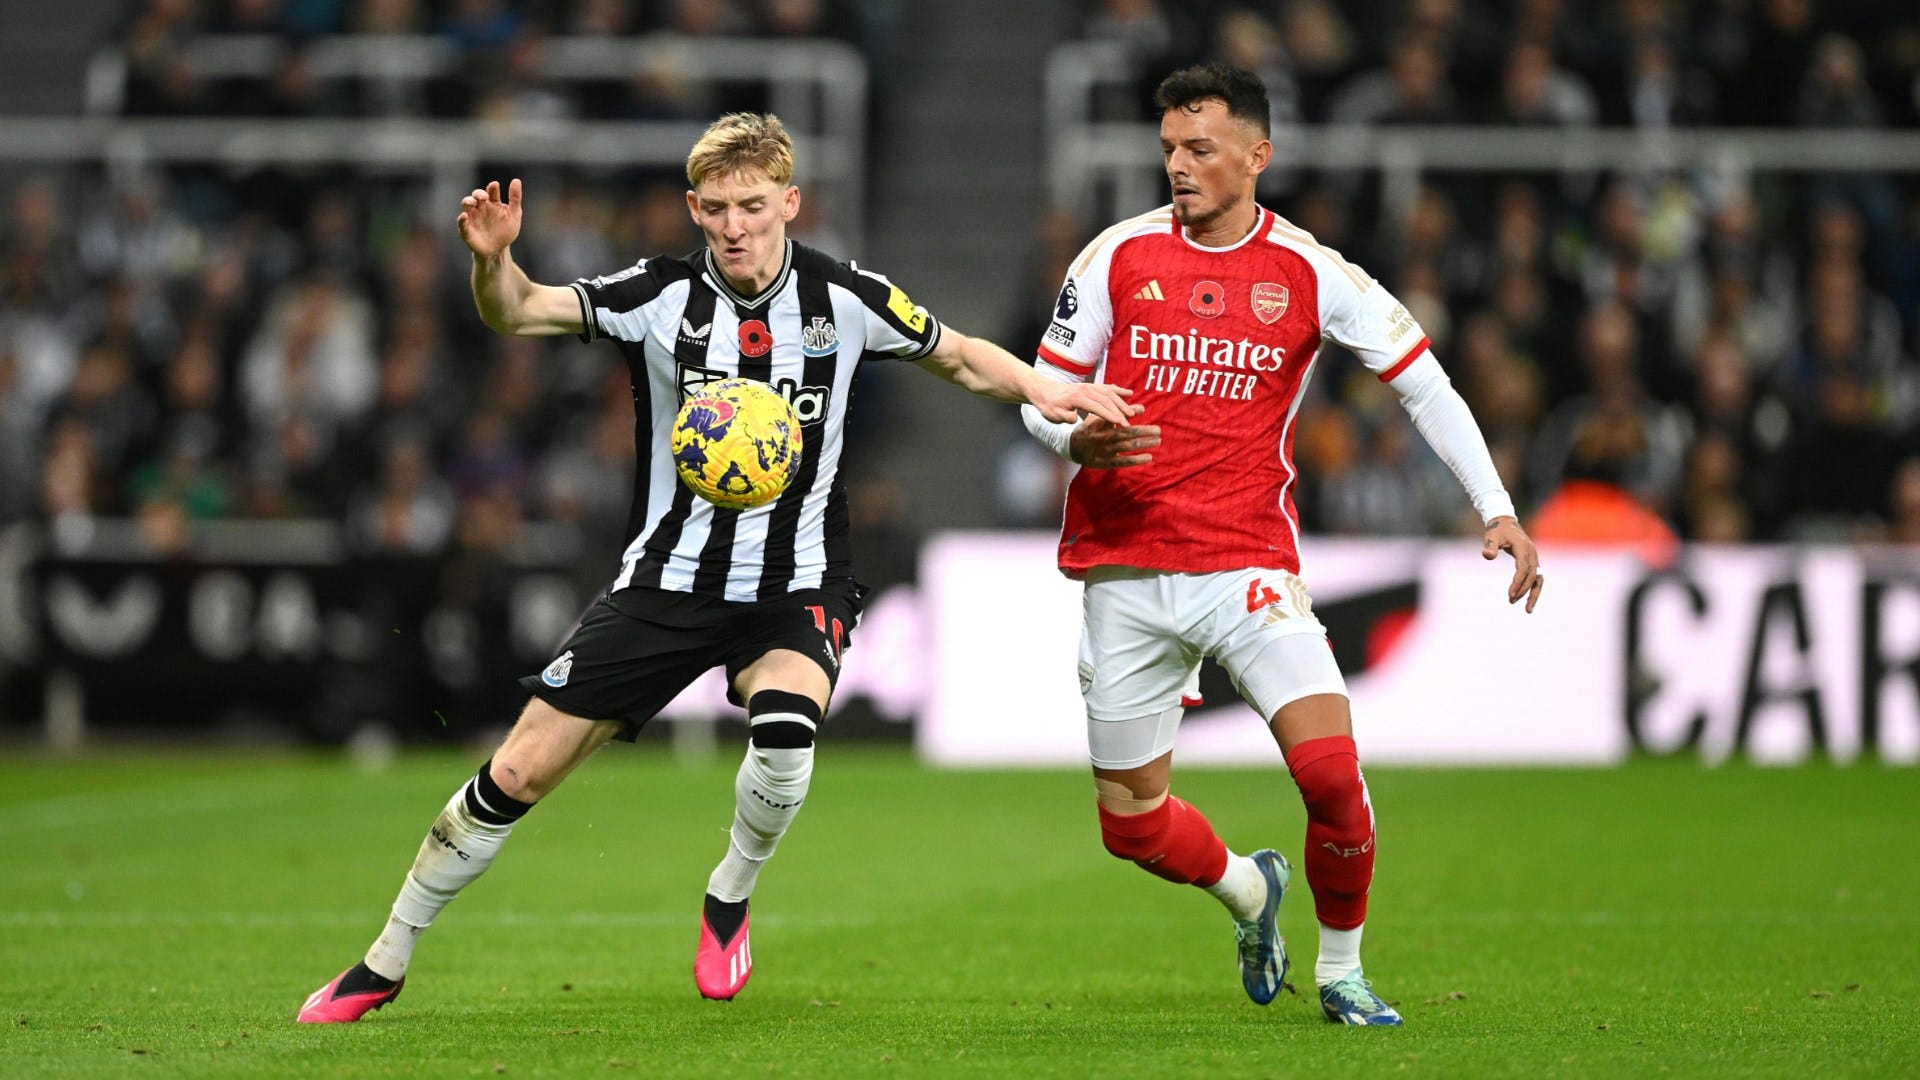 Explained: Why Arsenal v Newcastle is taking place at 8pm on a Saturday